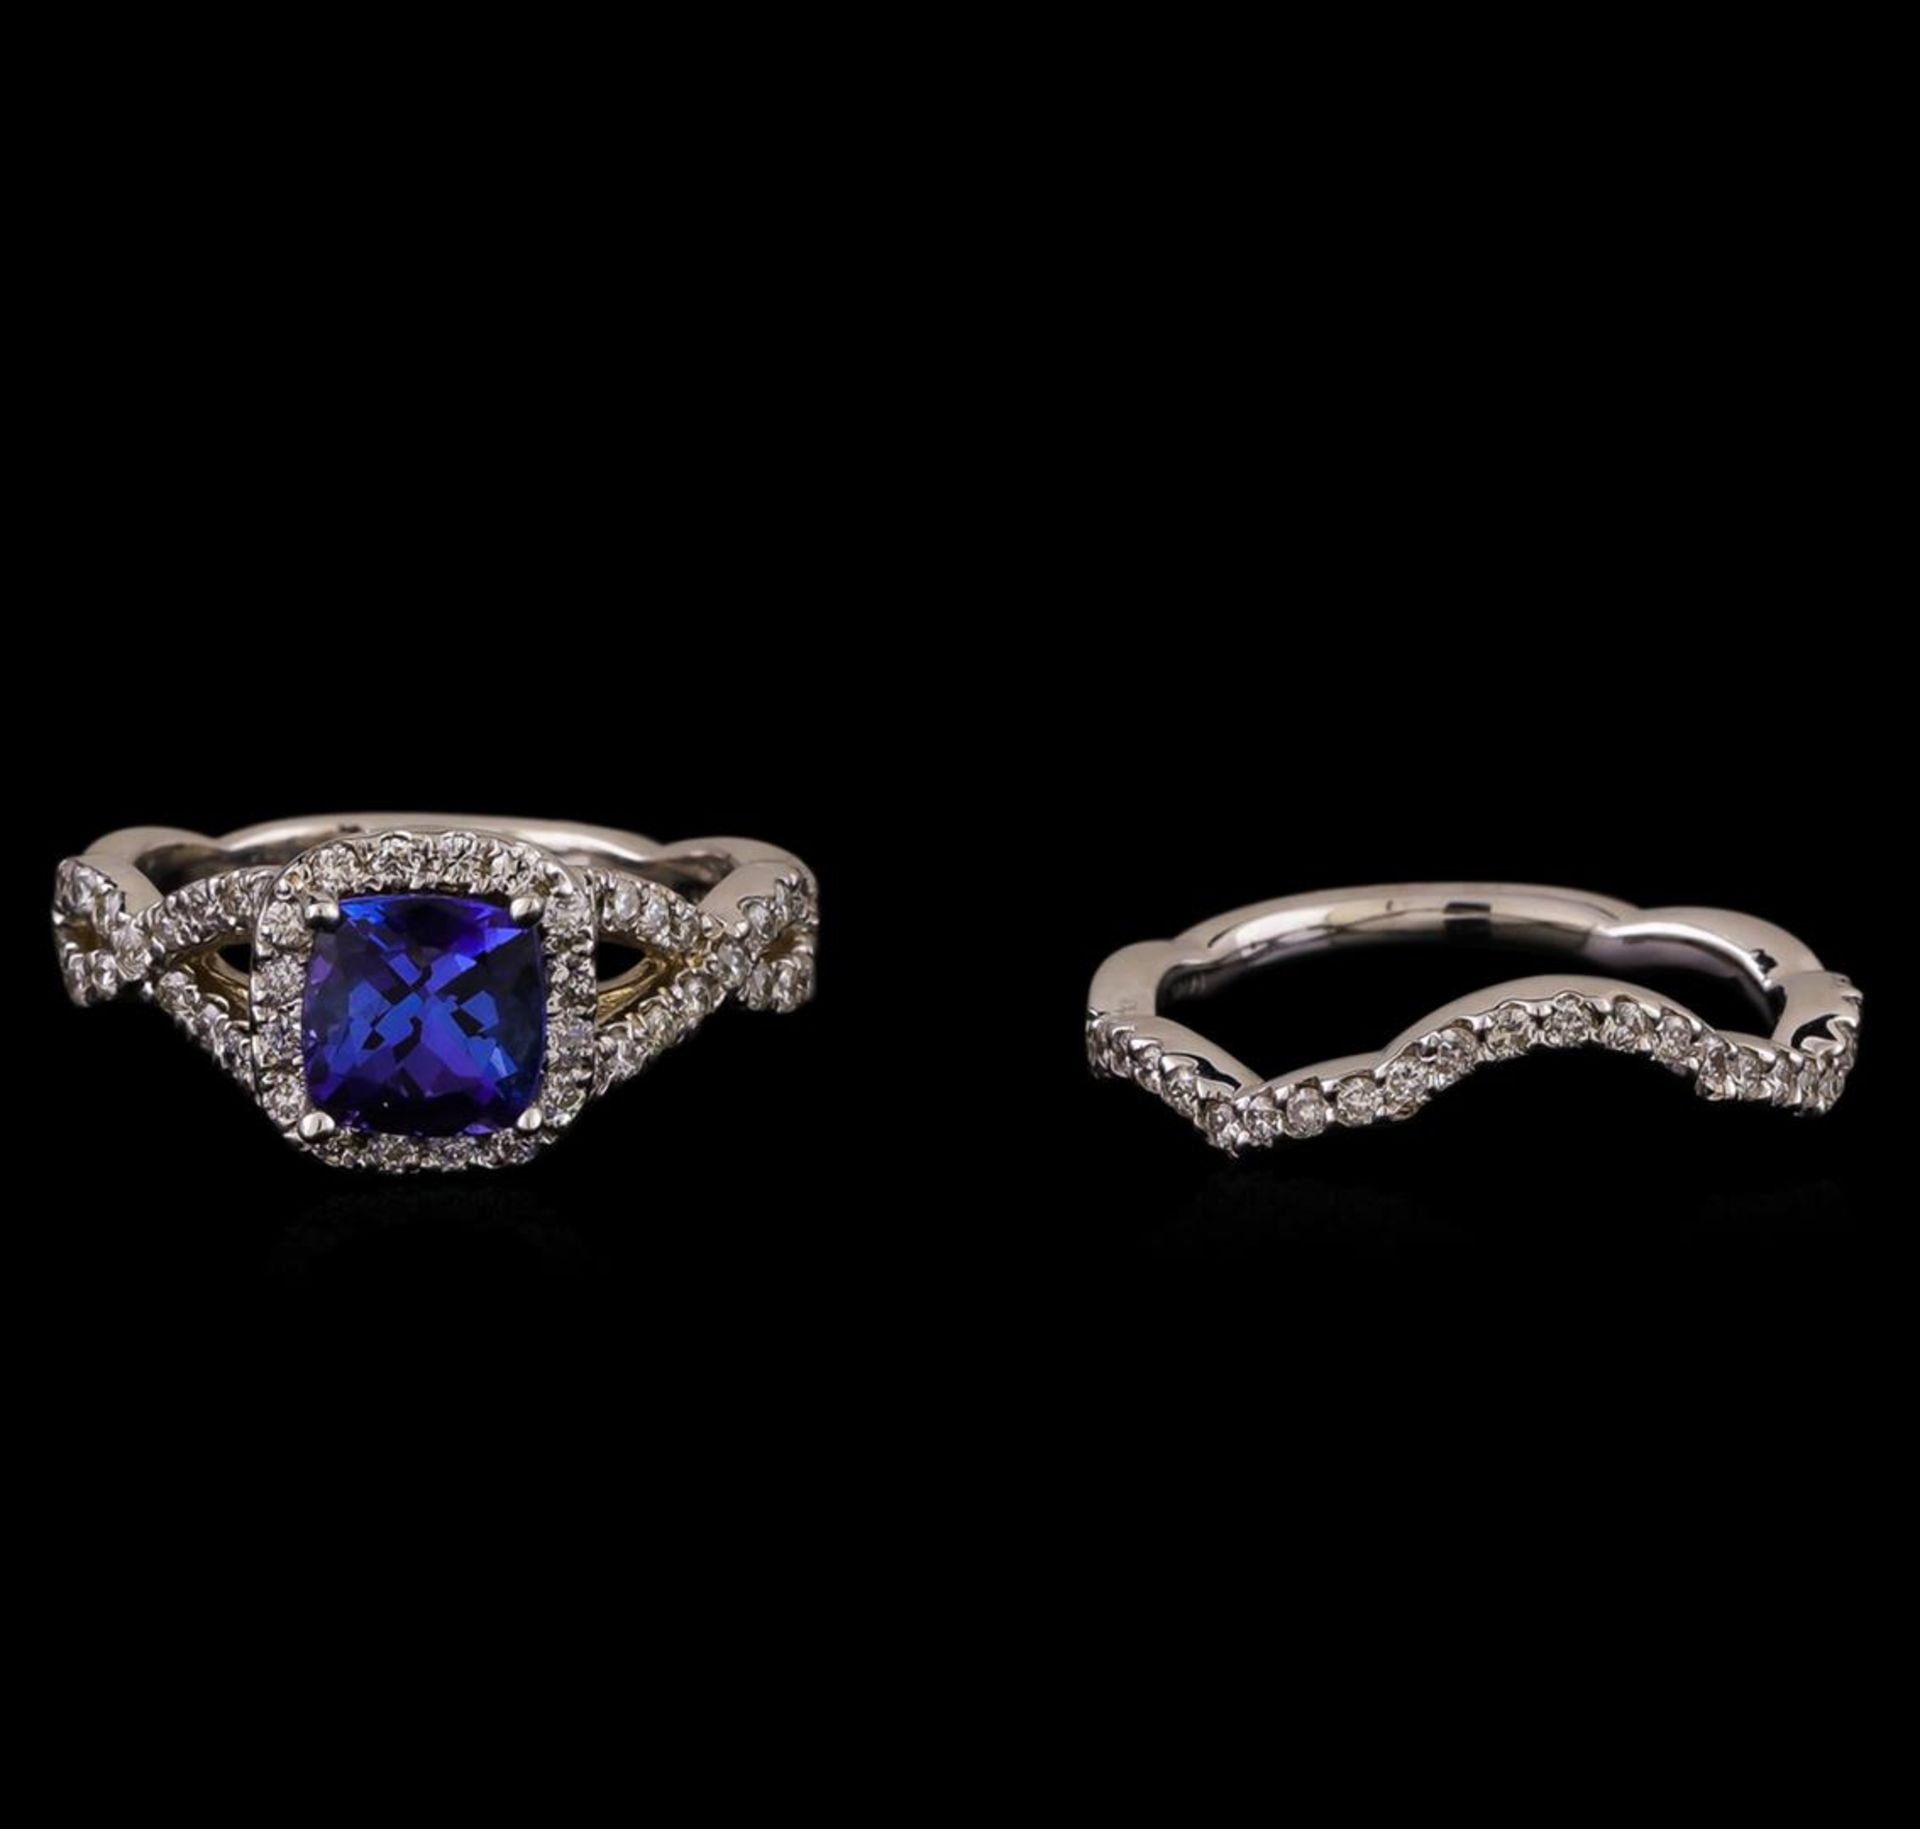 14KT White Gold 1.22 ctw Tanzanite and Diamond Ring and Guard - Image 2 of 4